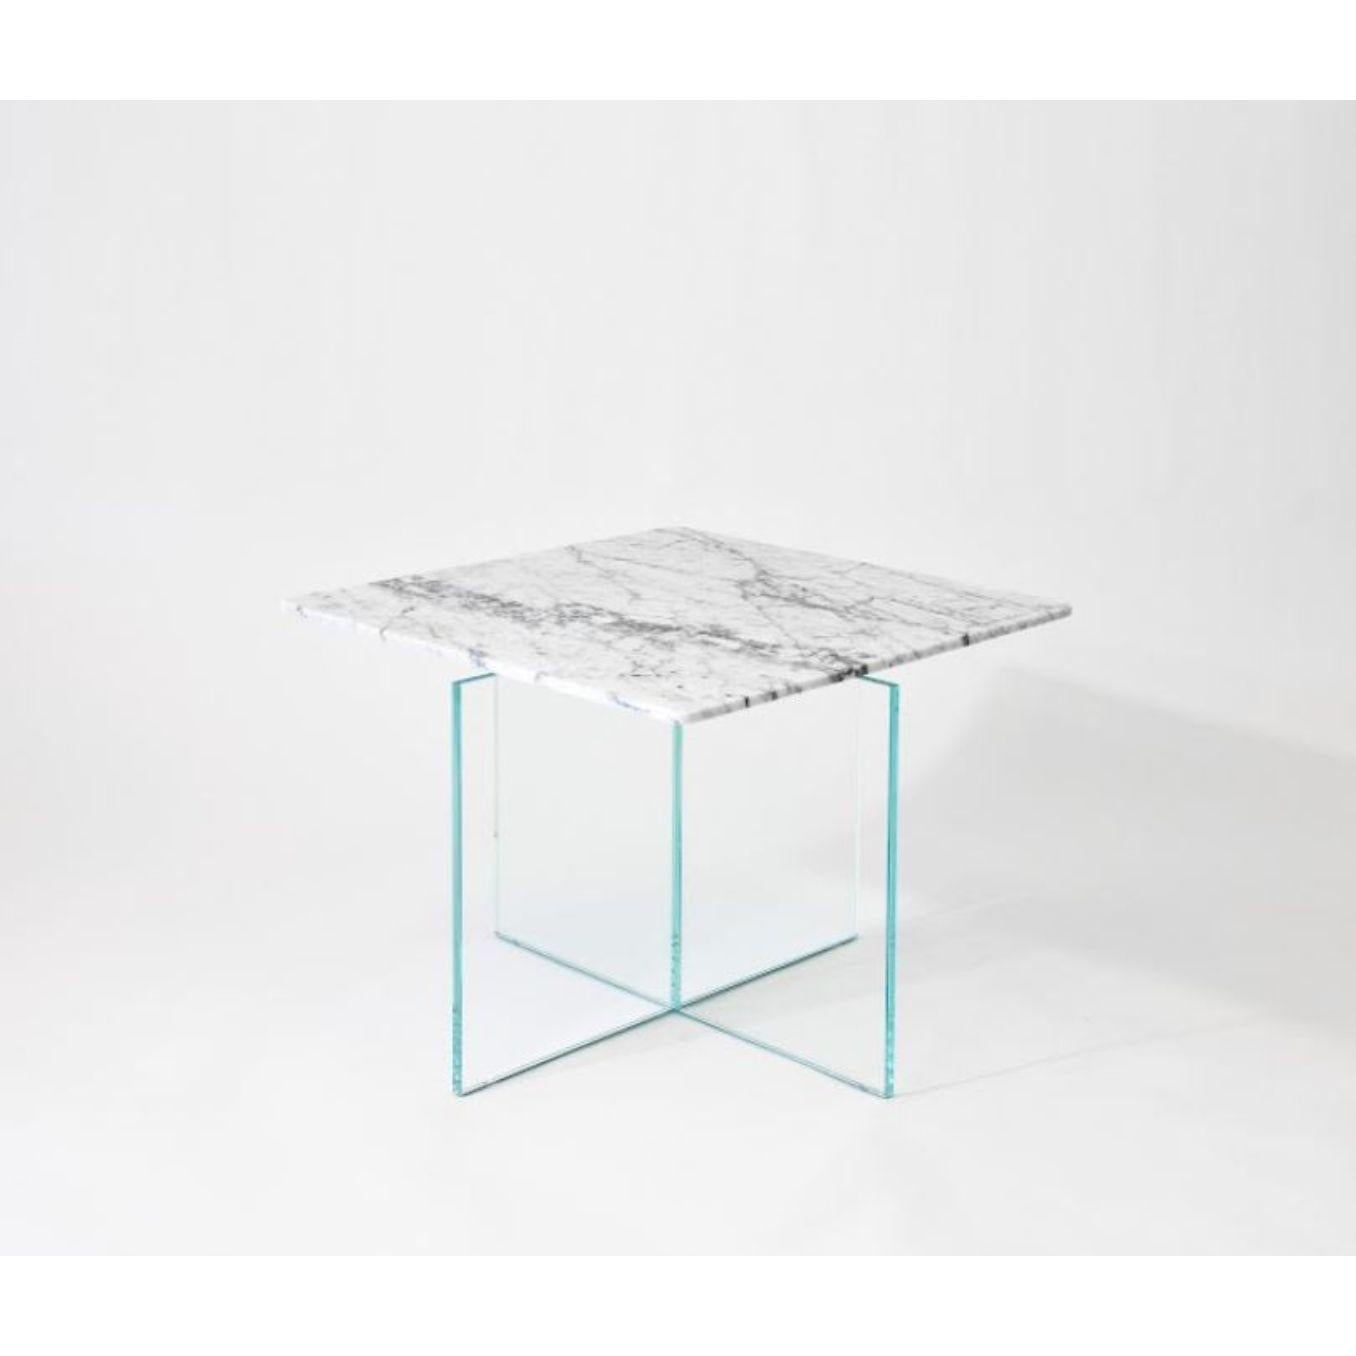 Beside myself end large table by Claste
Dimensions: D 55.9 x W 55.9 x H 55.9 cm
Material: Marble, Glass
Weight: 48 kg

Since 2017 Quinlan Osborne has cultivated an aesthetic in his work that is rooted in the passion for contemporary design he